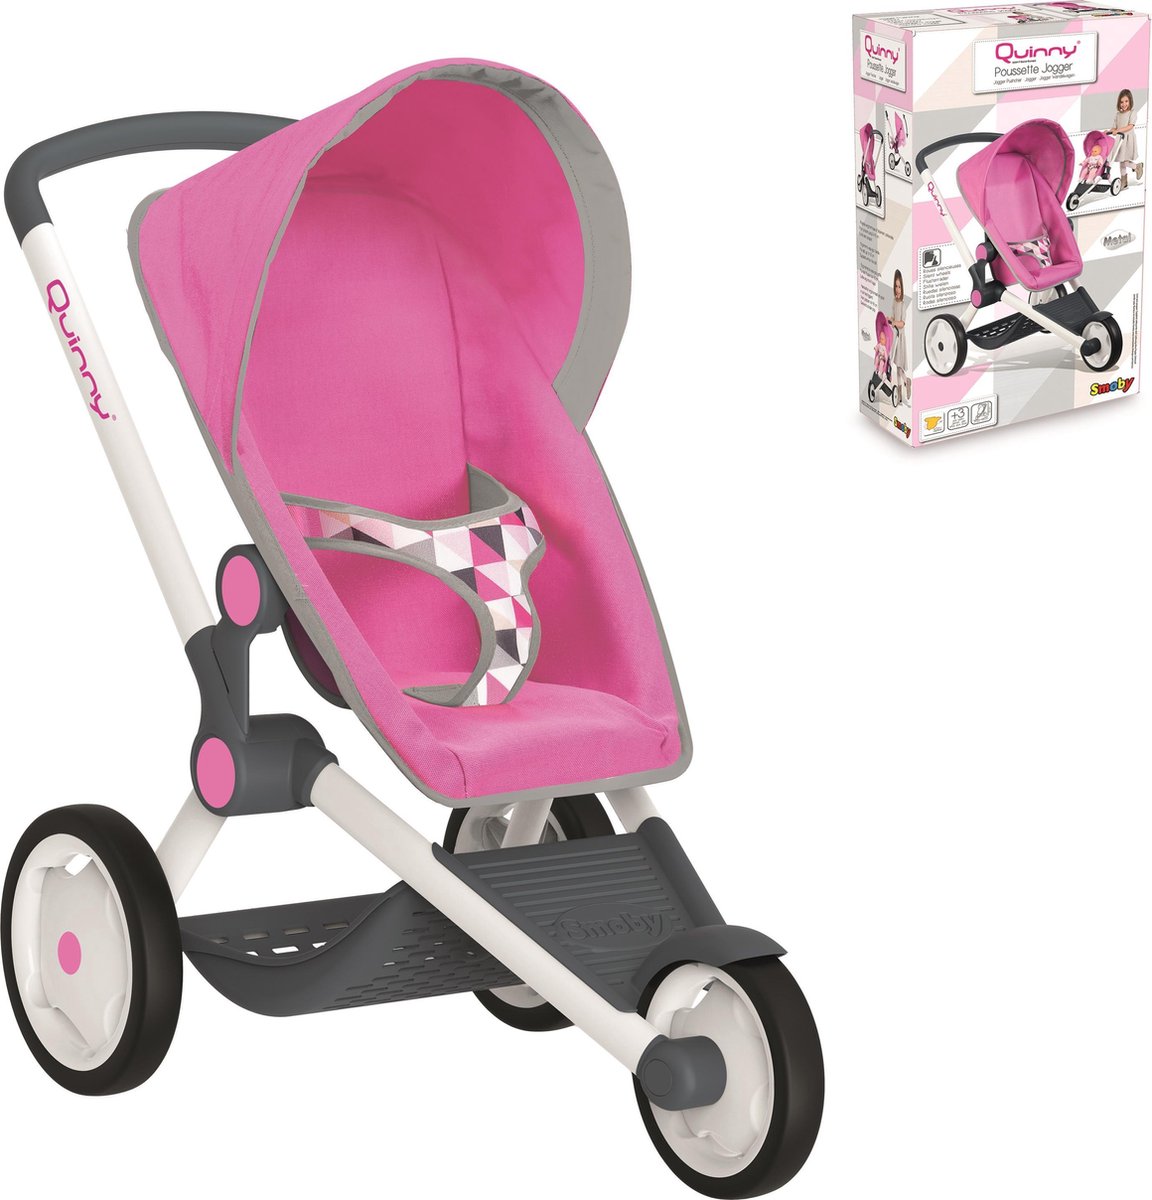 Smoby Quinny Jogger buggy. |